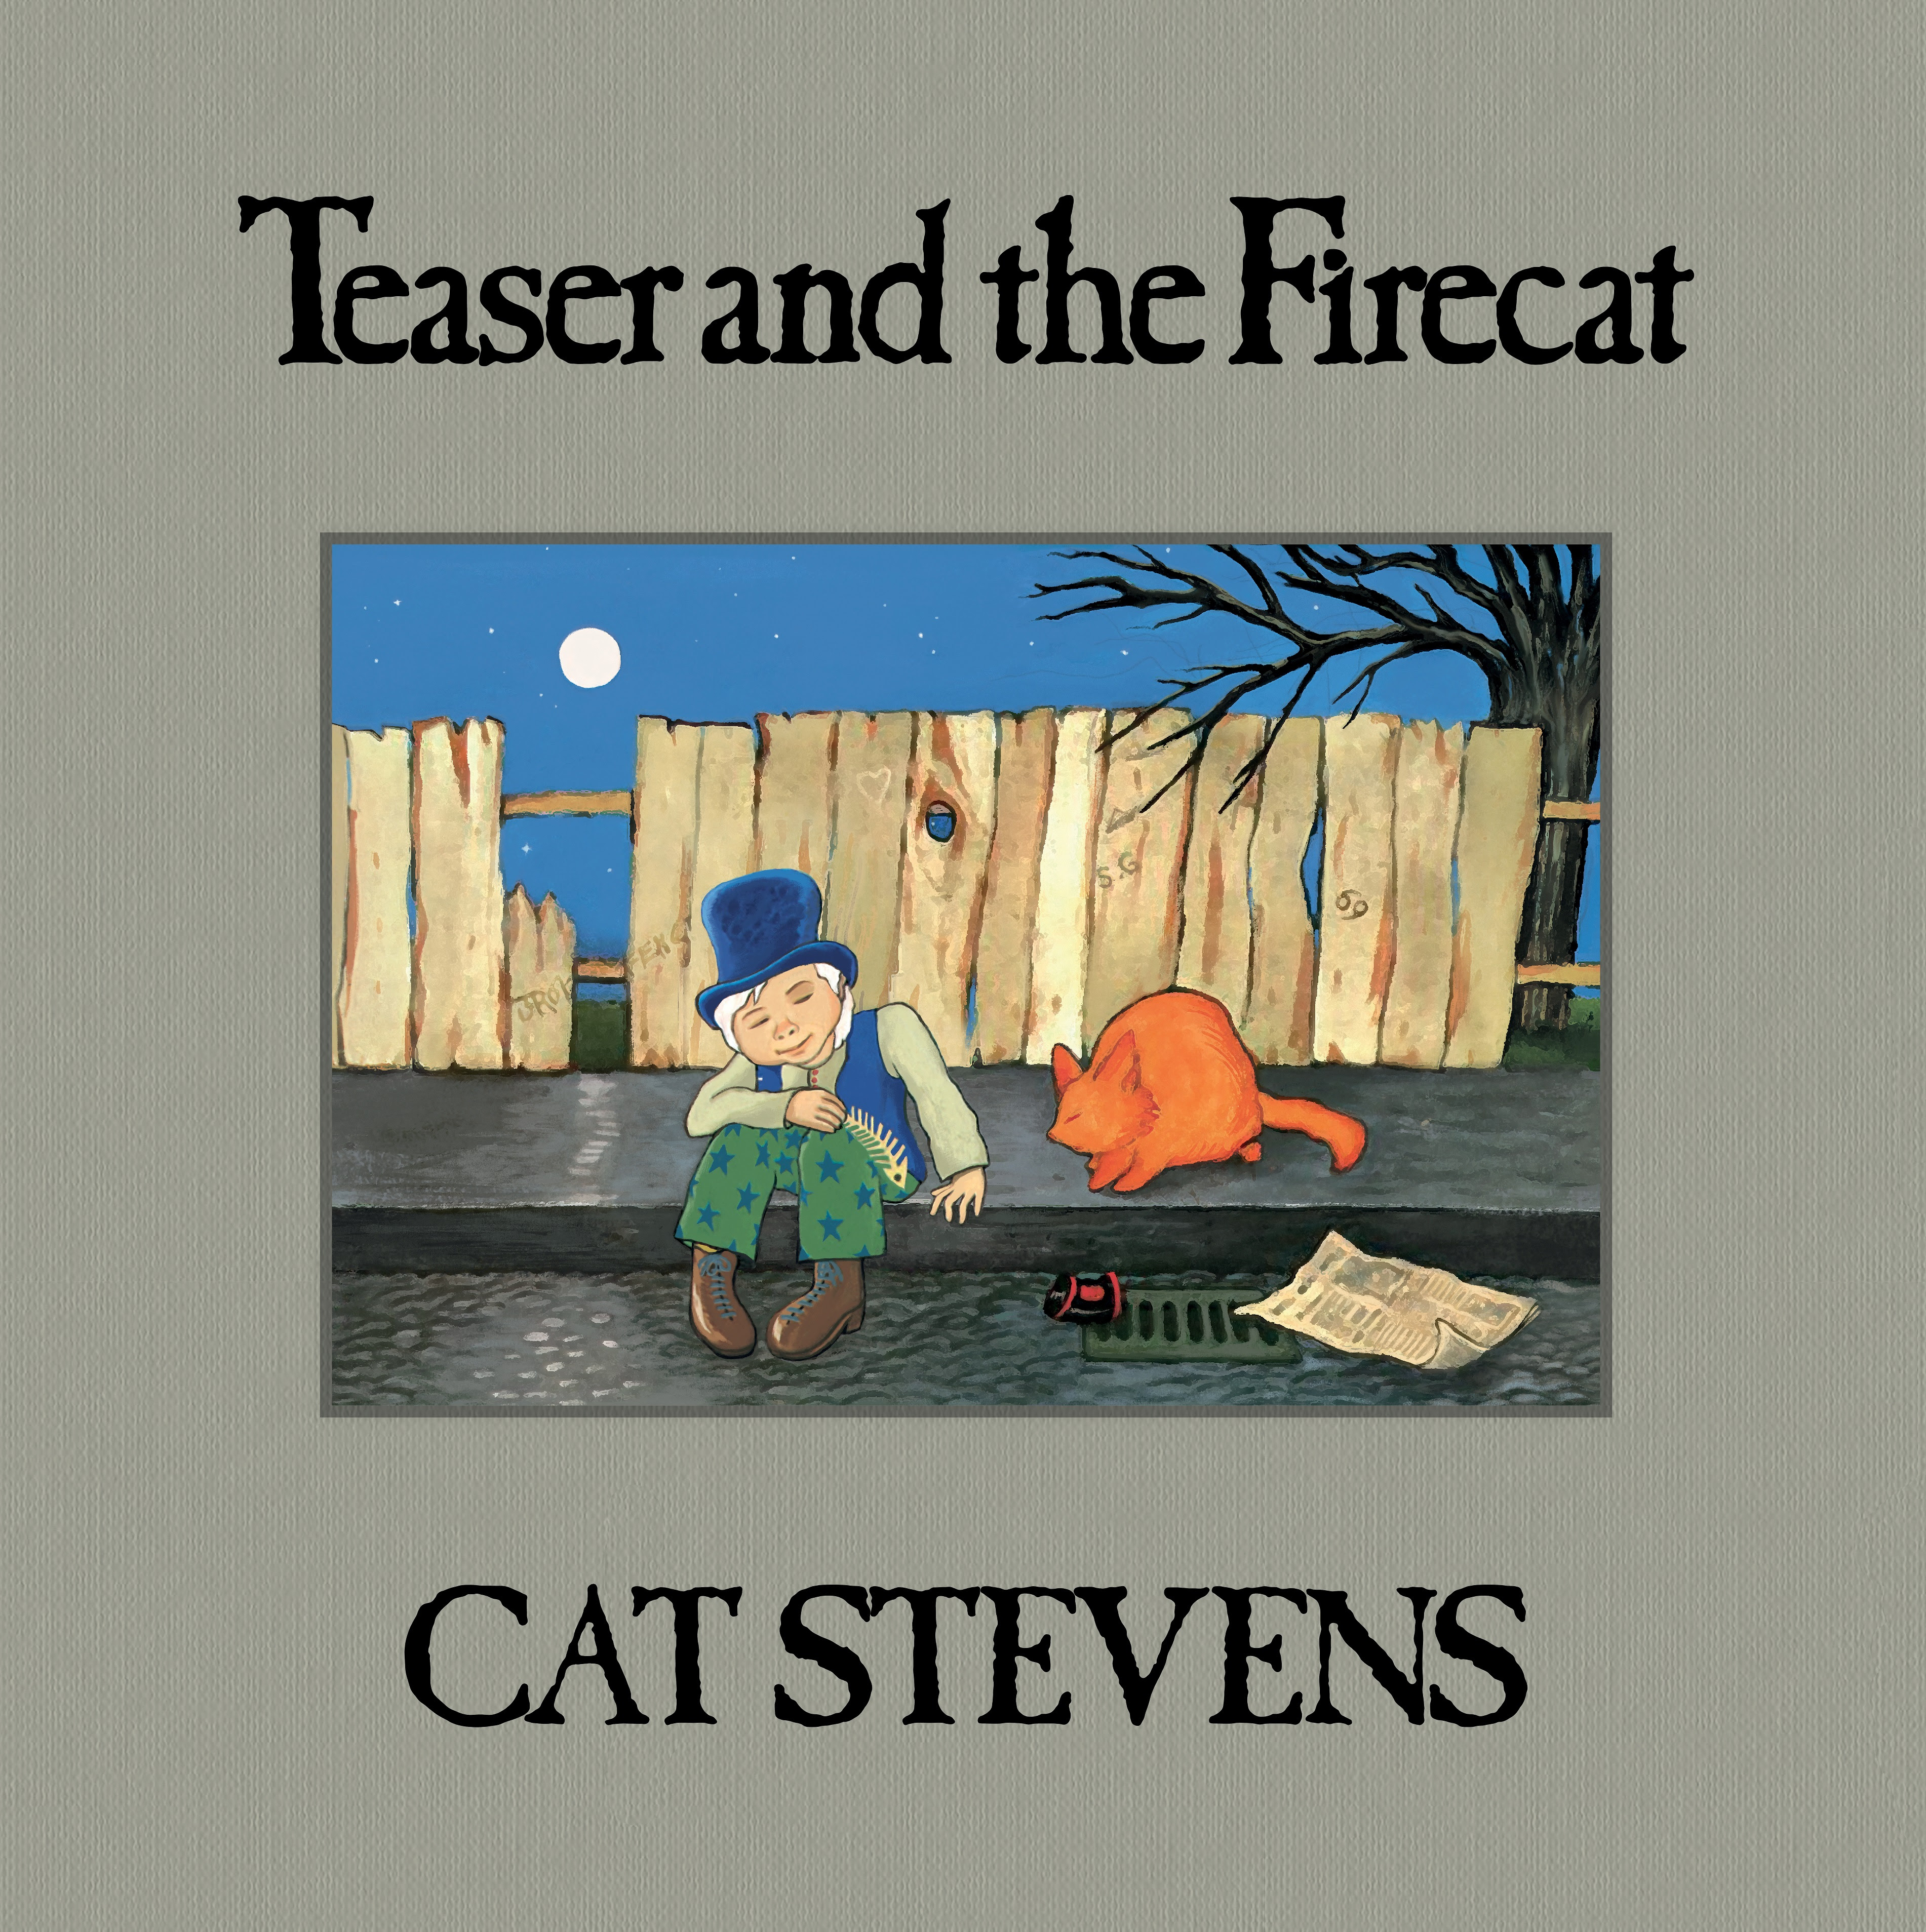 Yusuf / Cat Stevens' "Teaser and the Firecat" 50th Anniversary Editions Available Now